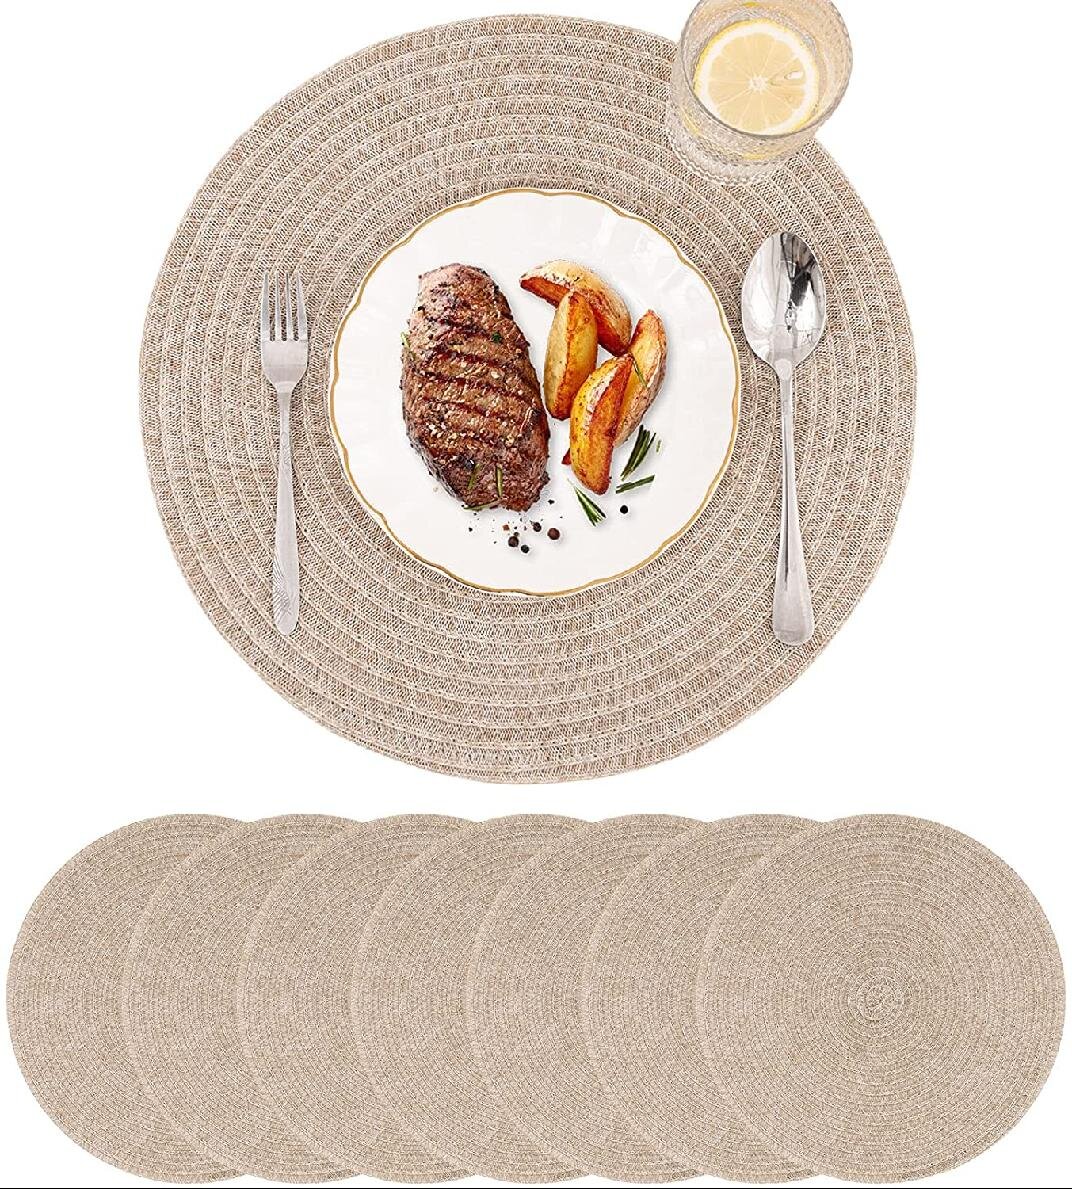 Set of 6 Place Mats And Coasters PVC Non-Slip Washable Placemat For Dinner Plate